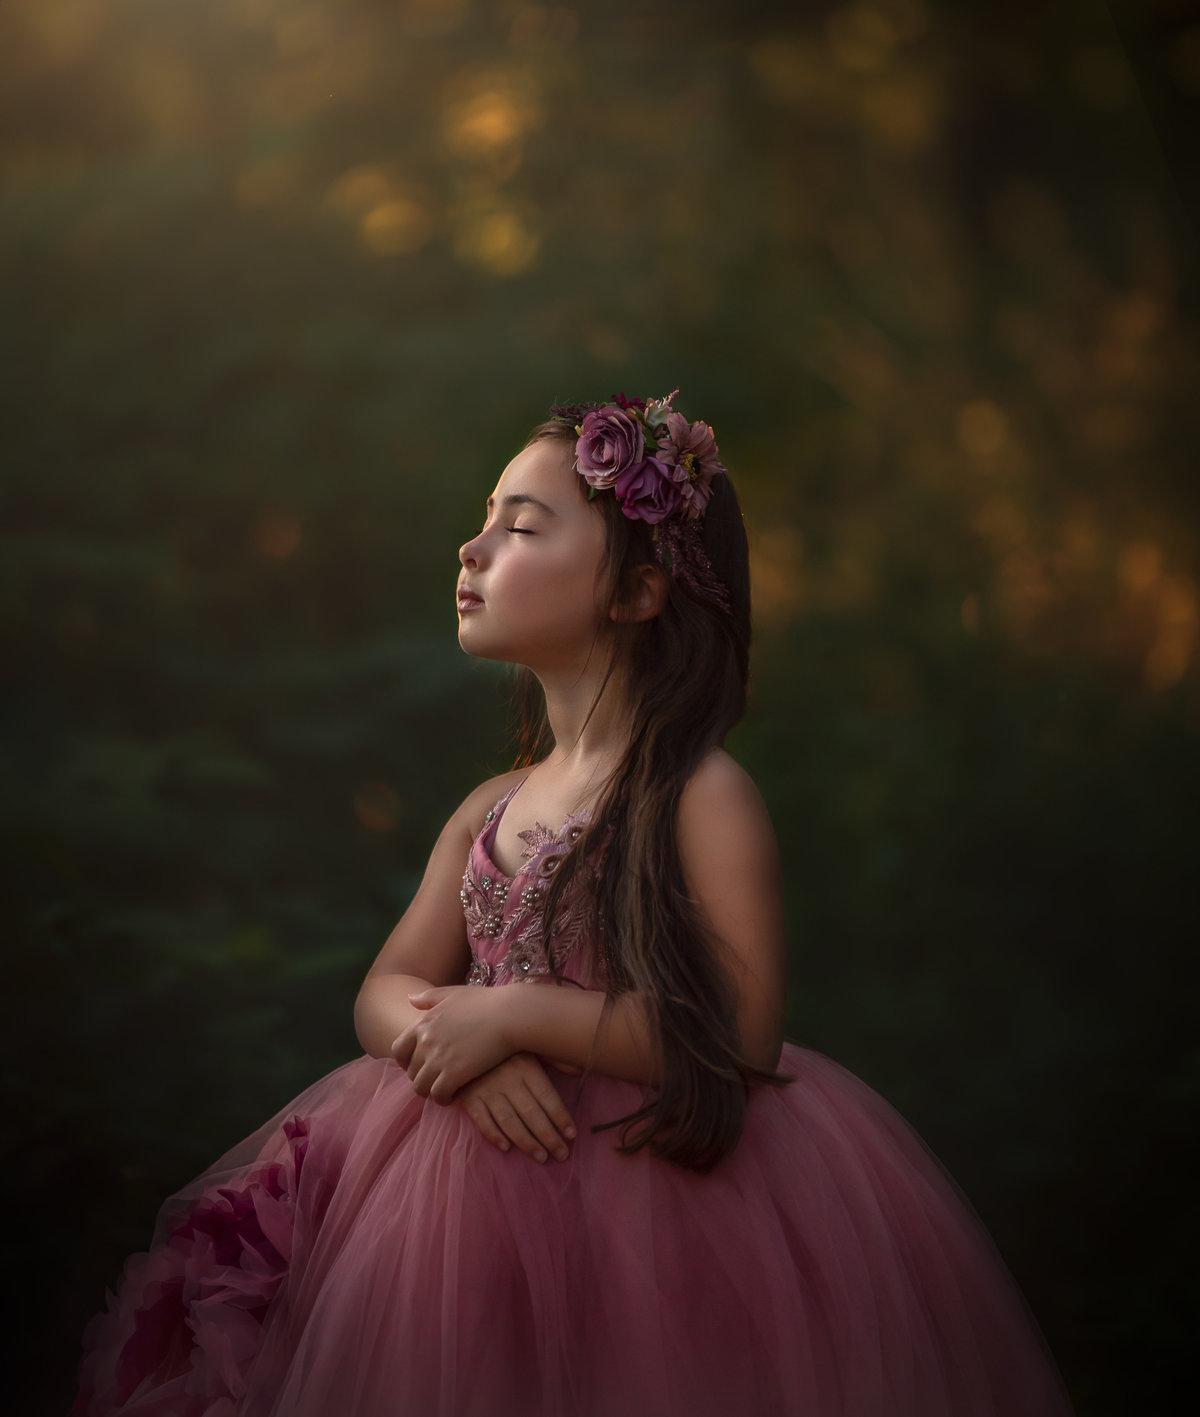 A young girl in a calm pink gown standing in an outdoor setting. Photo taken by Sonia Gourlie.